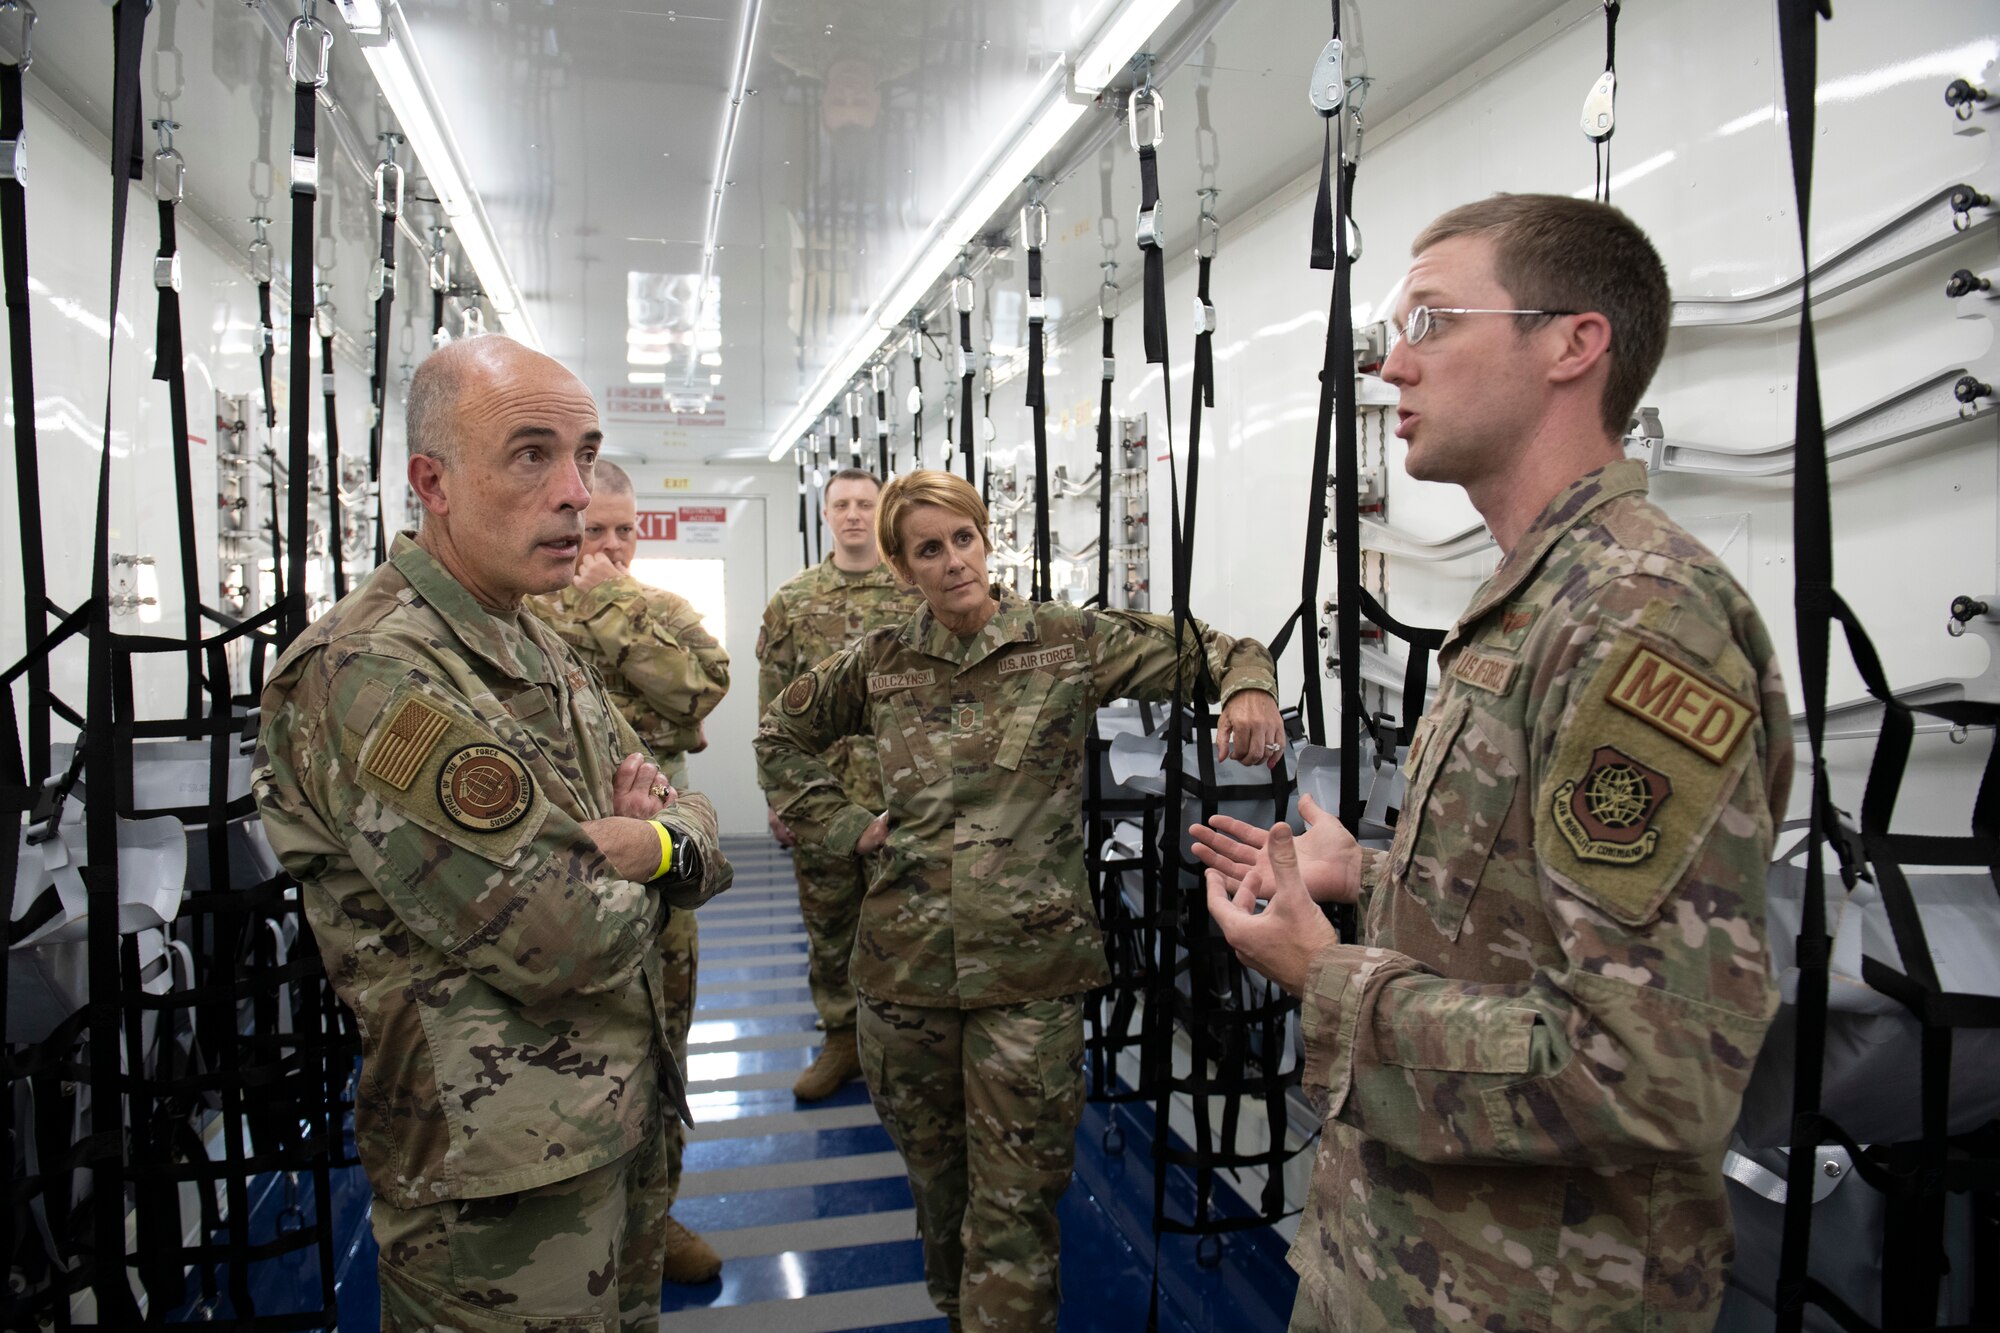 U.S. Air Force Major Michael Broome, 775th Expeditionary Aeromedical Evacuation Flight infectious disease nurse, right, briefs Lt. Gen. Robert Miller, Air Force and Space Force Surgeon General, left, and Chief Master Sgt. Dawn Kolczynski, medical enlisted force and enlisted corps chief, center, inside a Negatively Pressurized Connex July 27, 2021, at Travis Air Force Base, California.